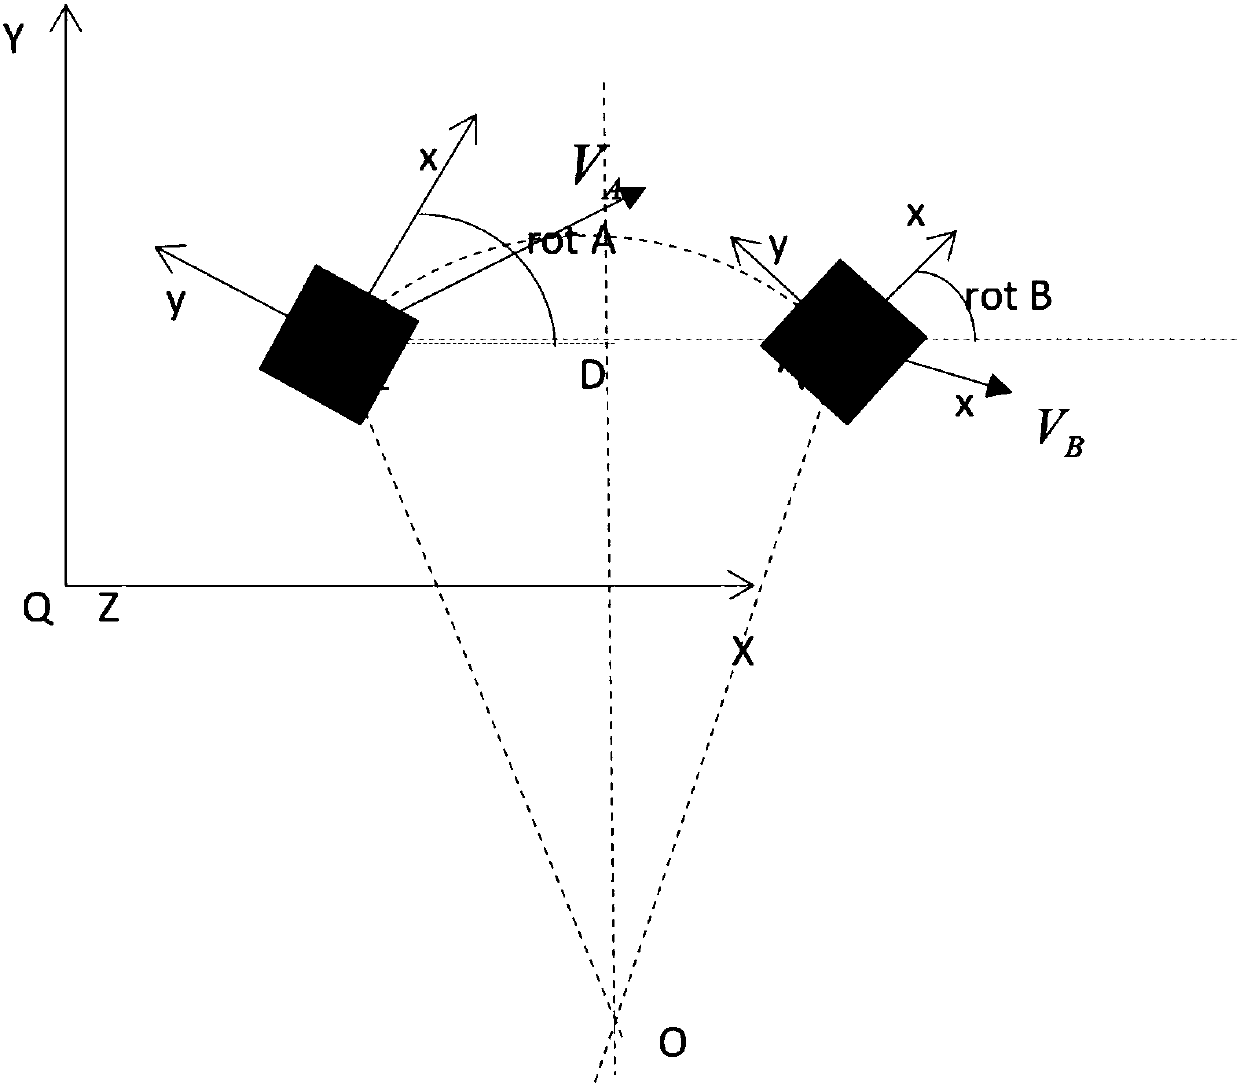 Movement control method of 2D (Two-Dimensional) wheeled robot based on moveable foot wheel